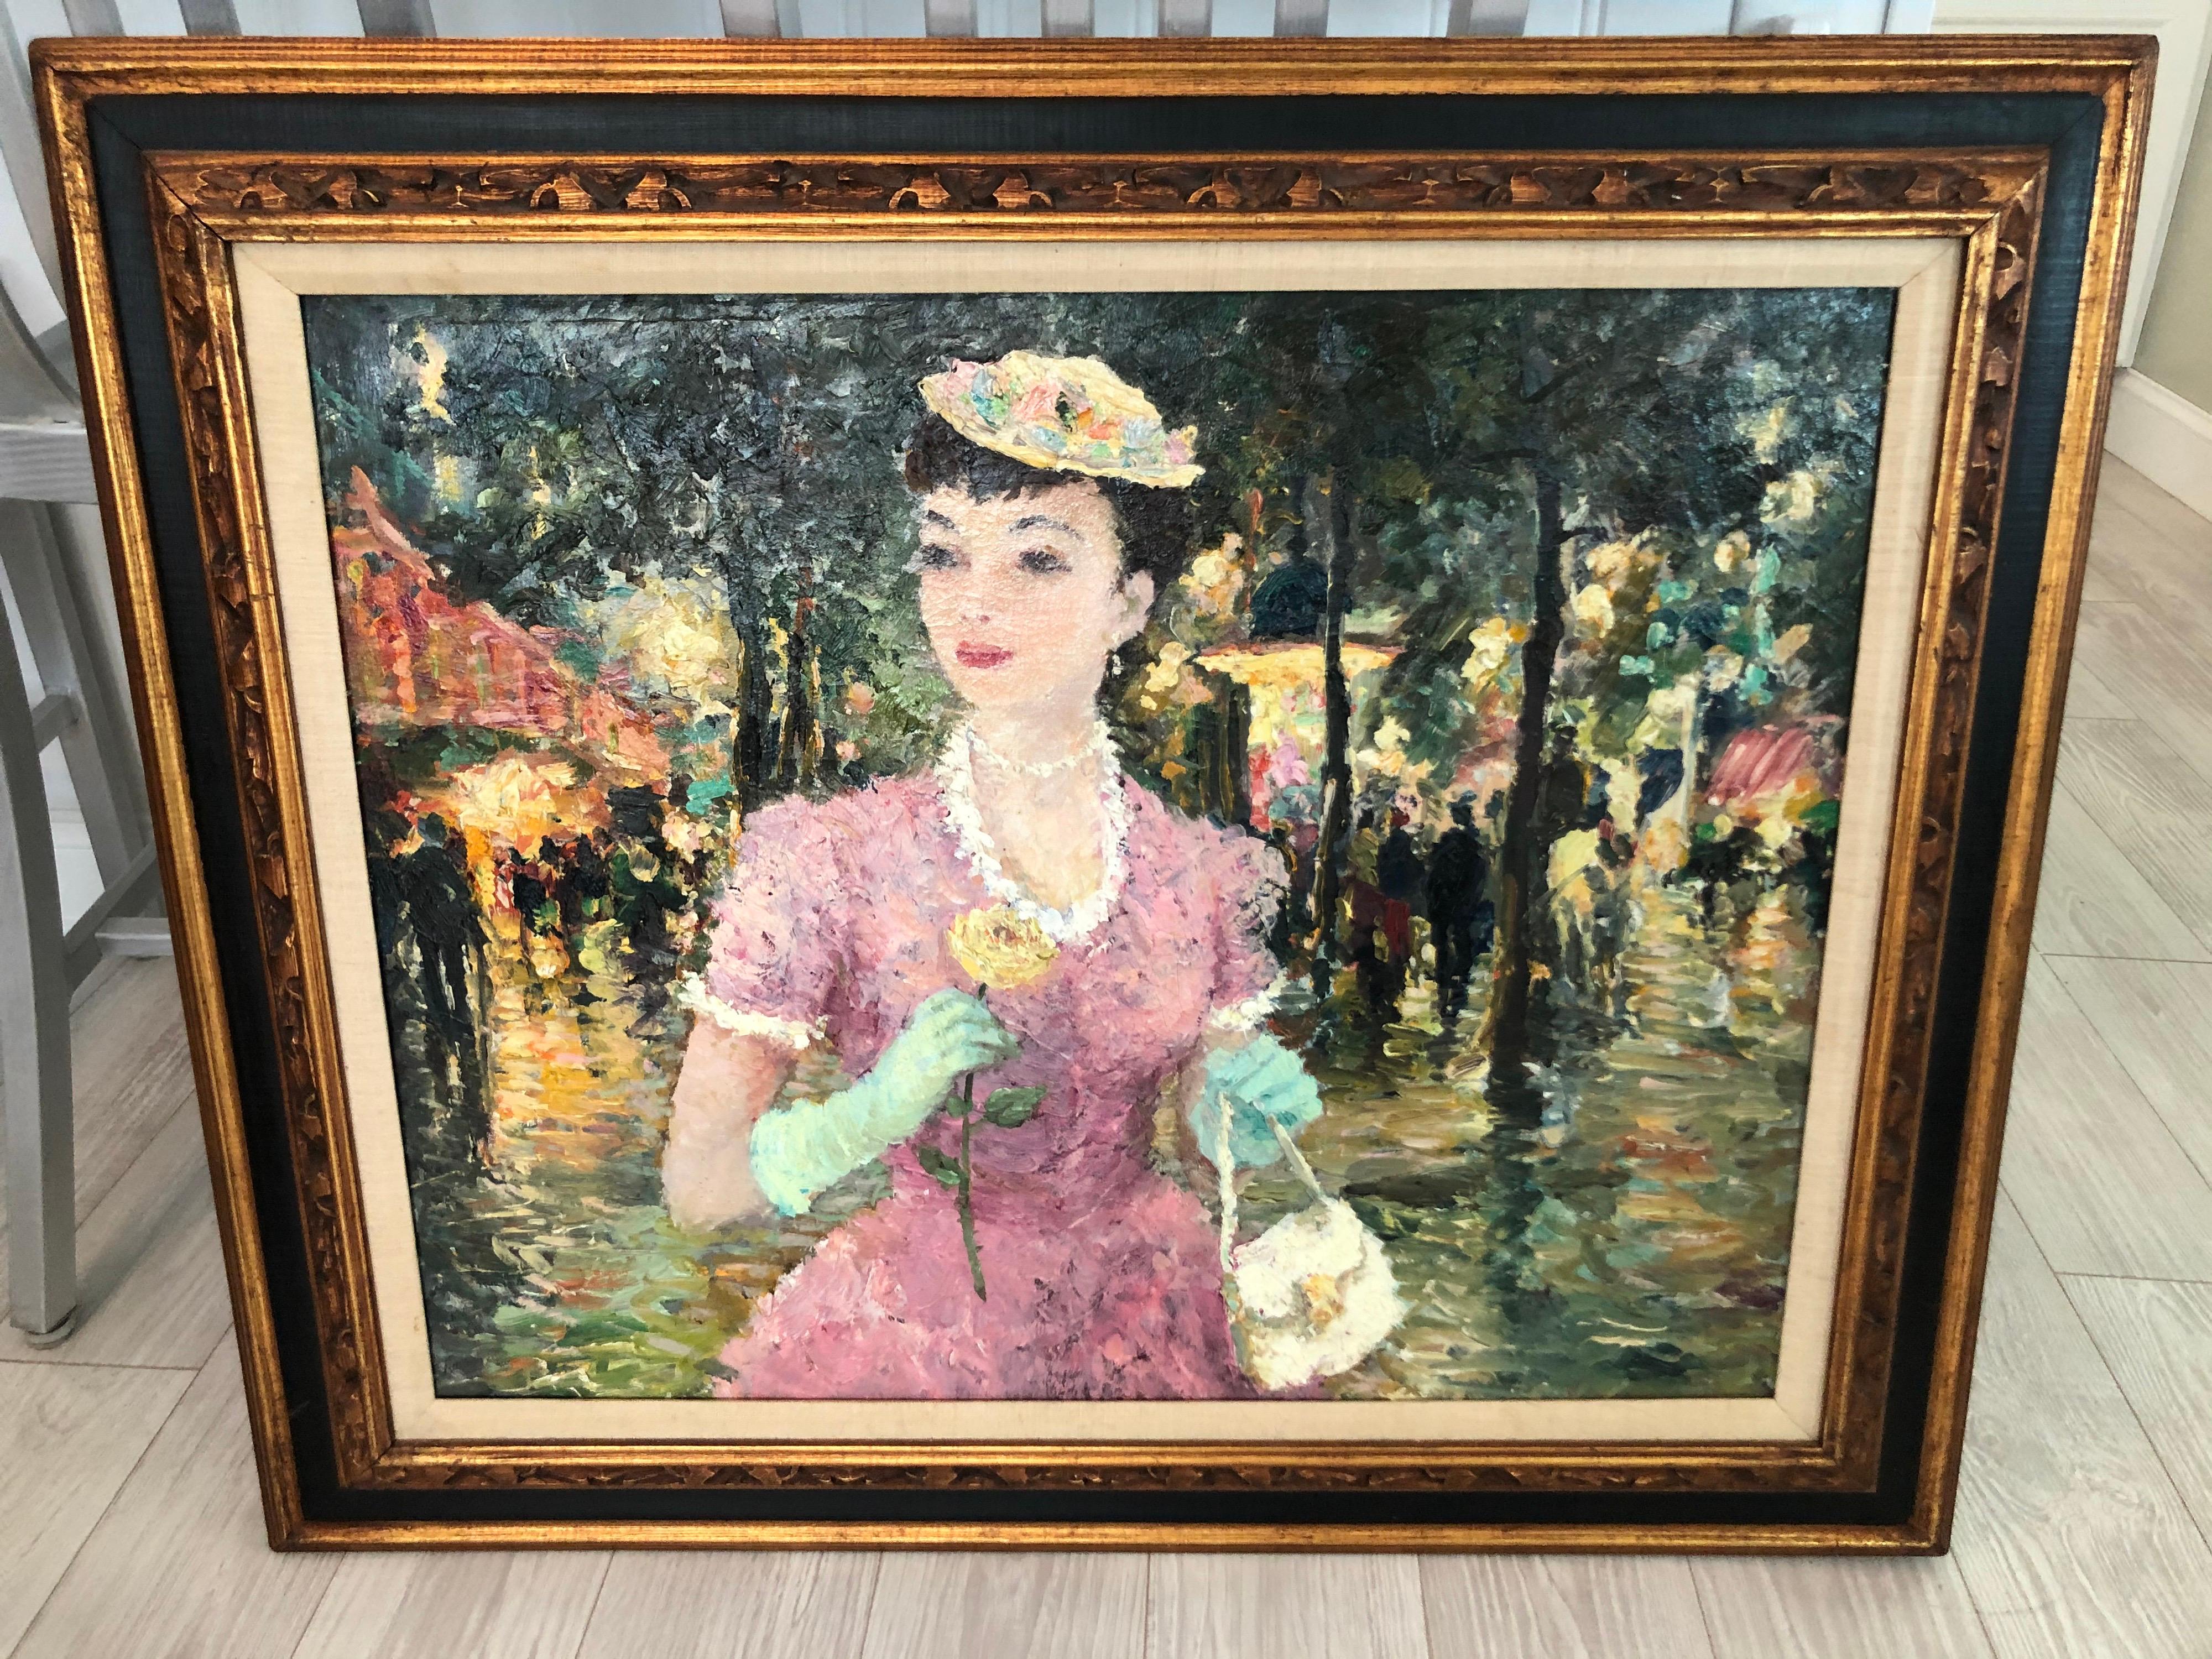 Impasto Impressionist Oil on Canvas of a Woman With a Rose Attributed to Dietz Edzard. Incredible piece of fine art history. A perfect gift for a serious collector.  There is no signature on the painting. But it looks as though the painting may have